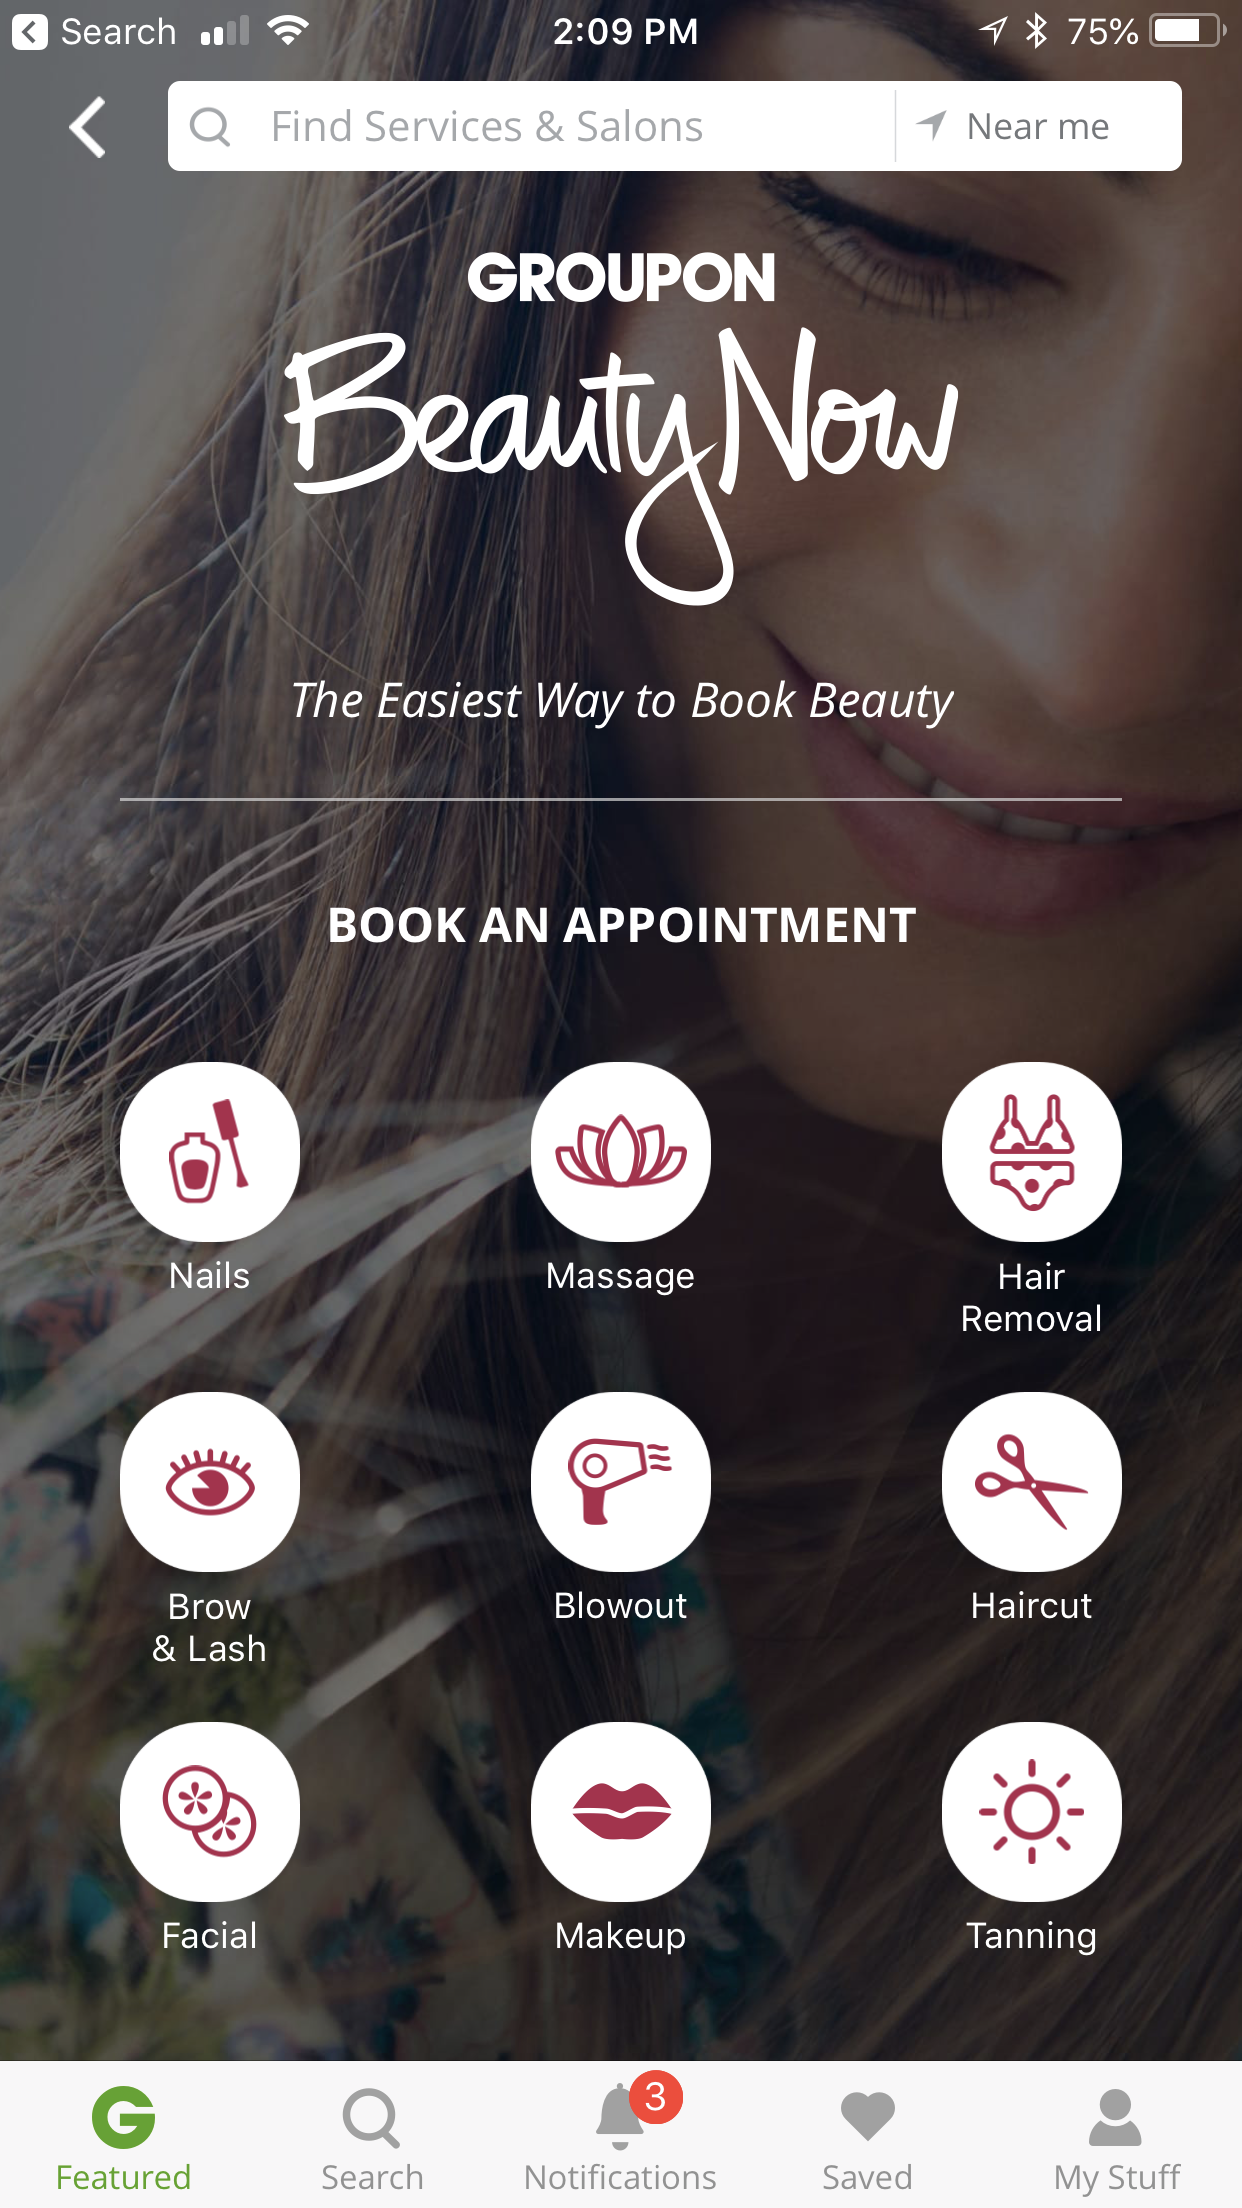 Book your next beauty service with Groupon's BeautyNow Booking. Schedule your services on your schedule, not theirs.